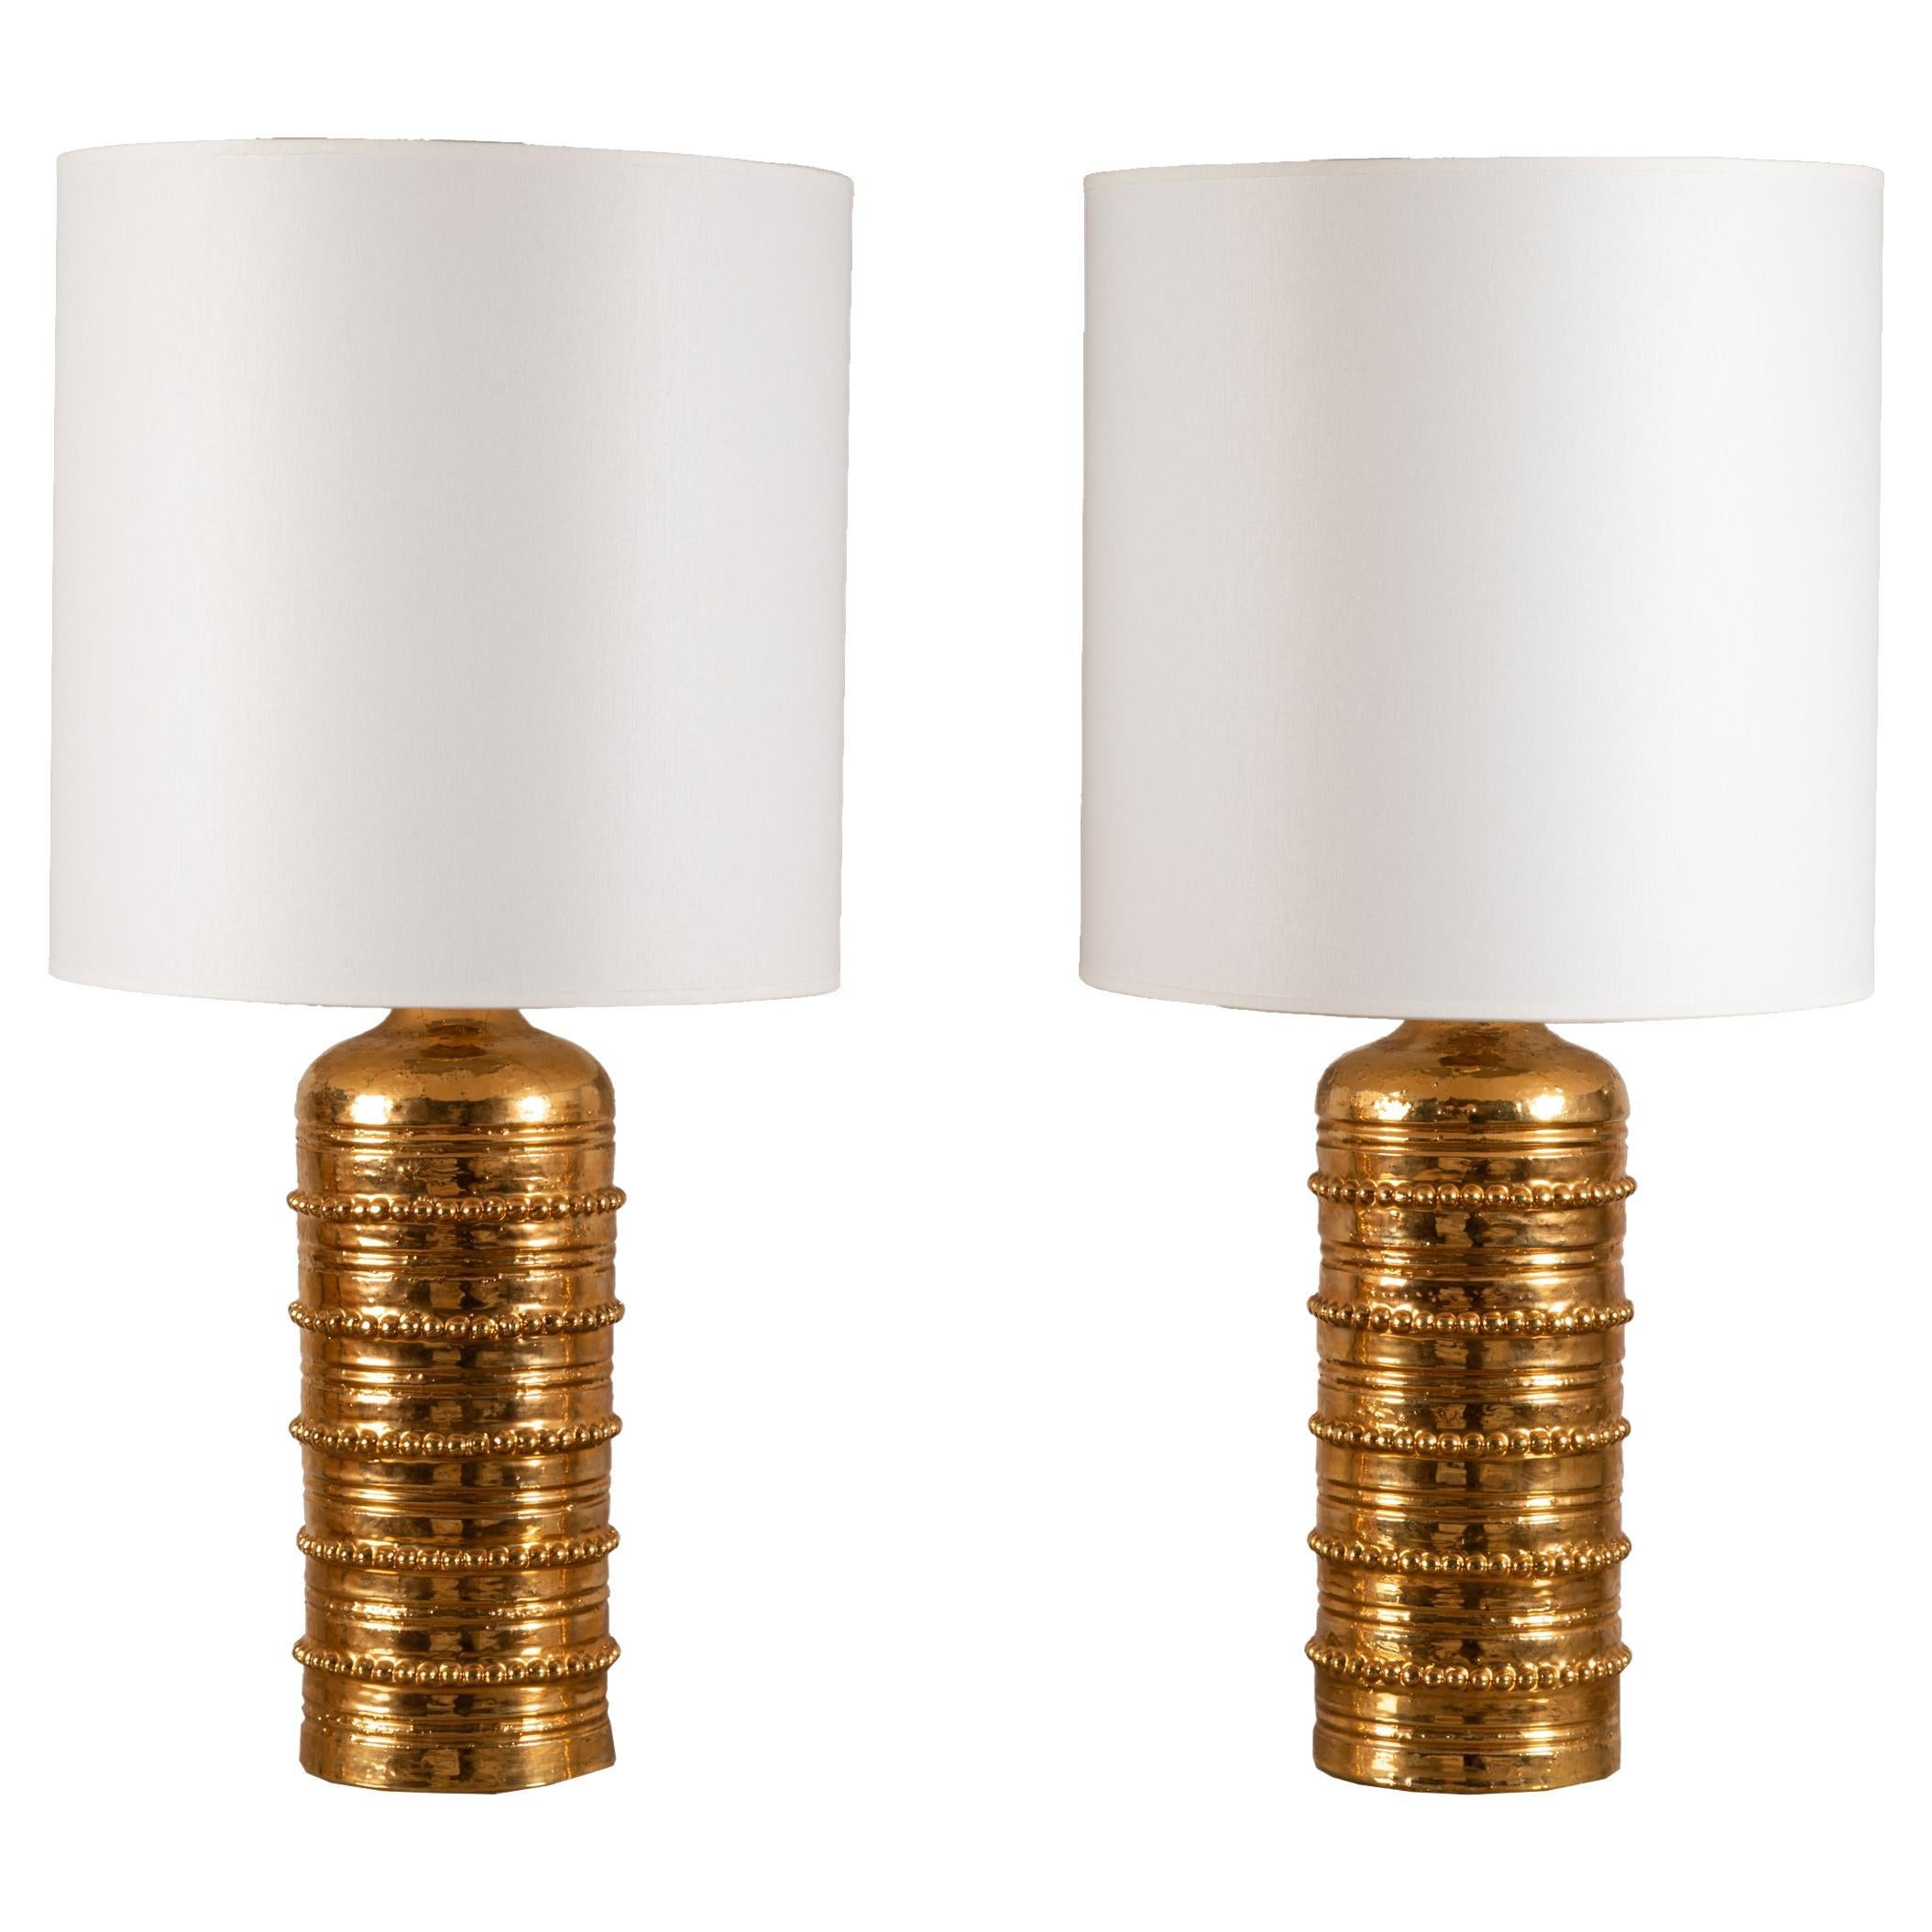 Pair of Gilded Ceramic Lamps by Bitossi